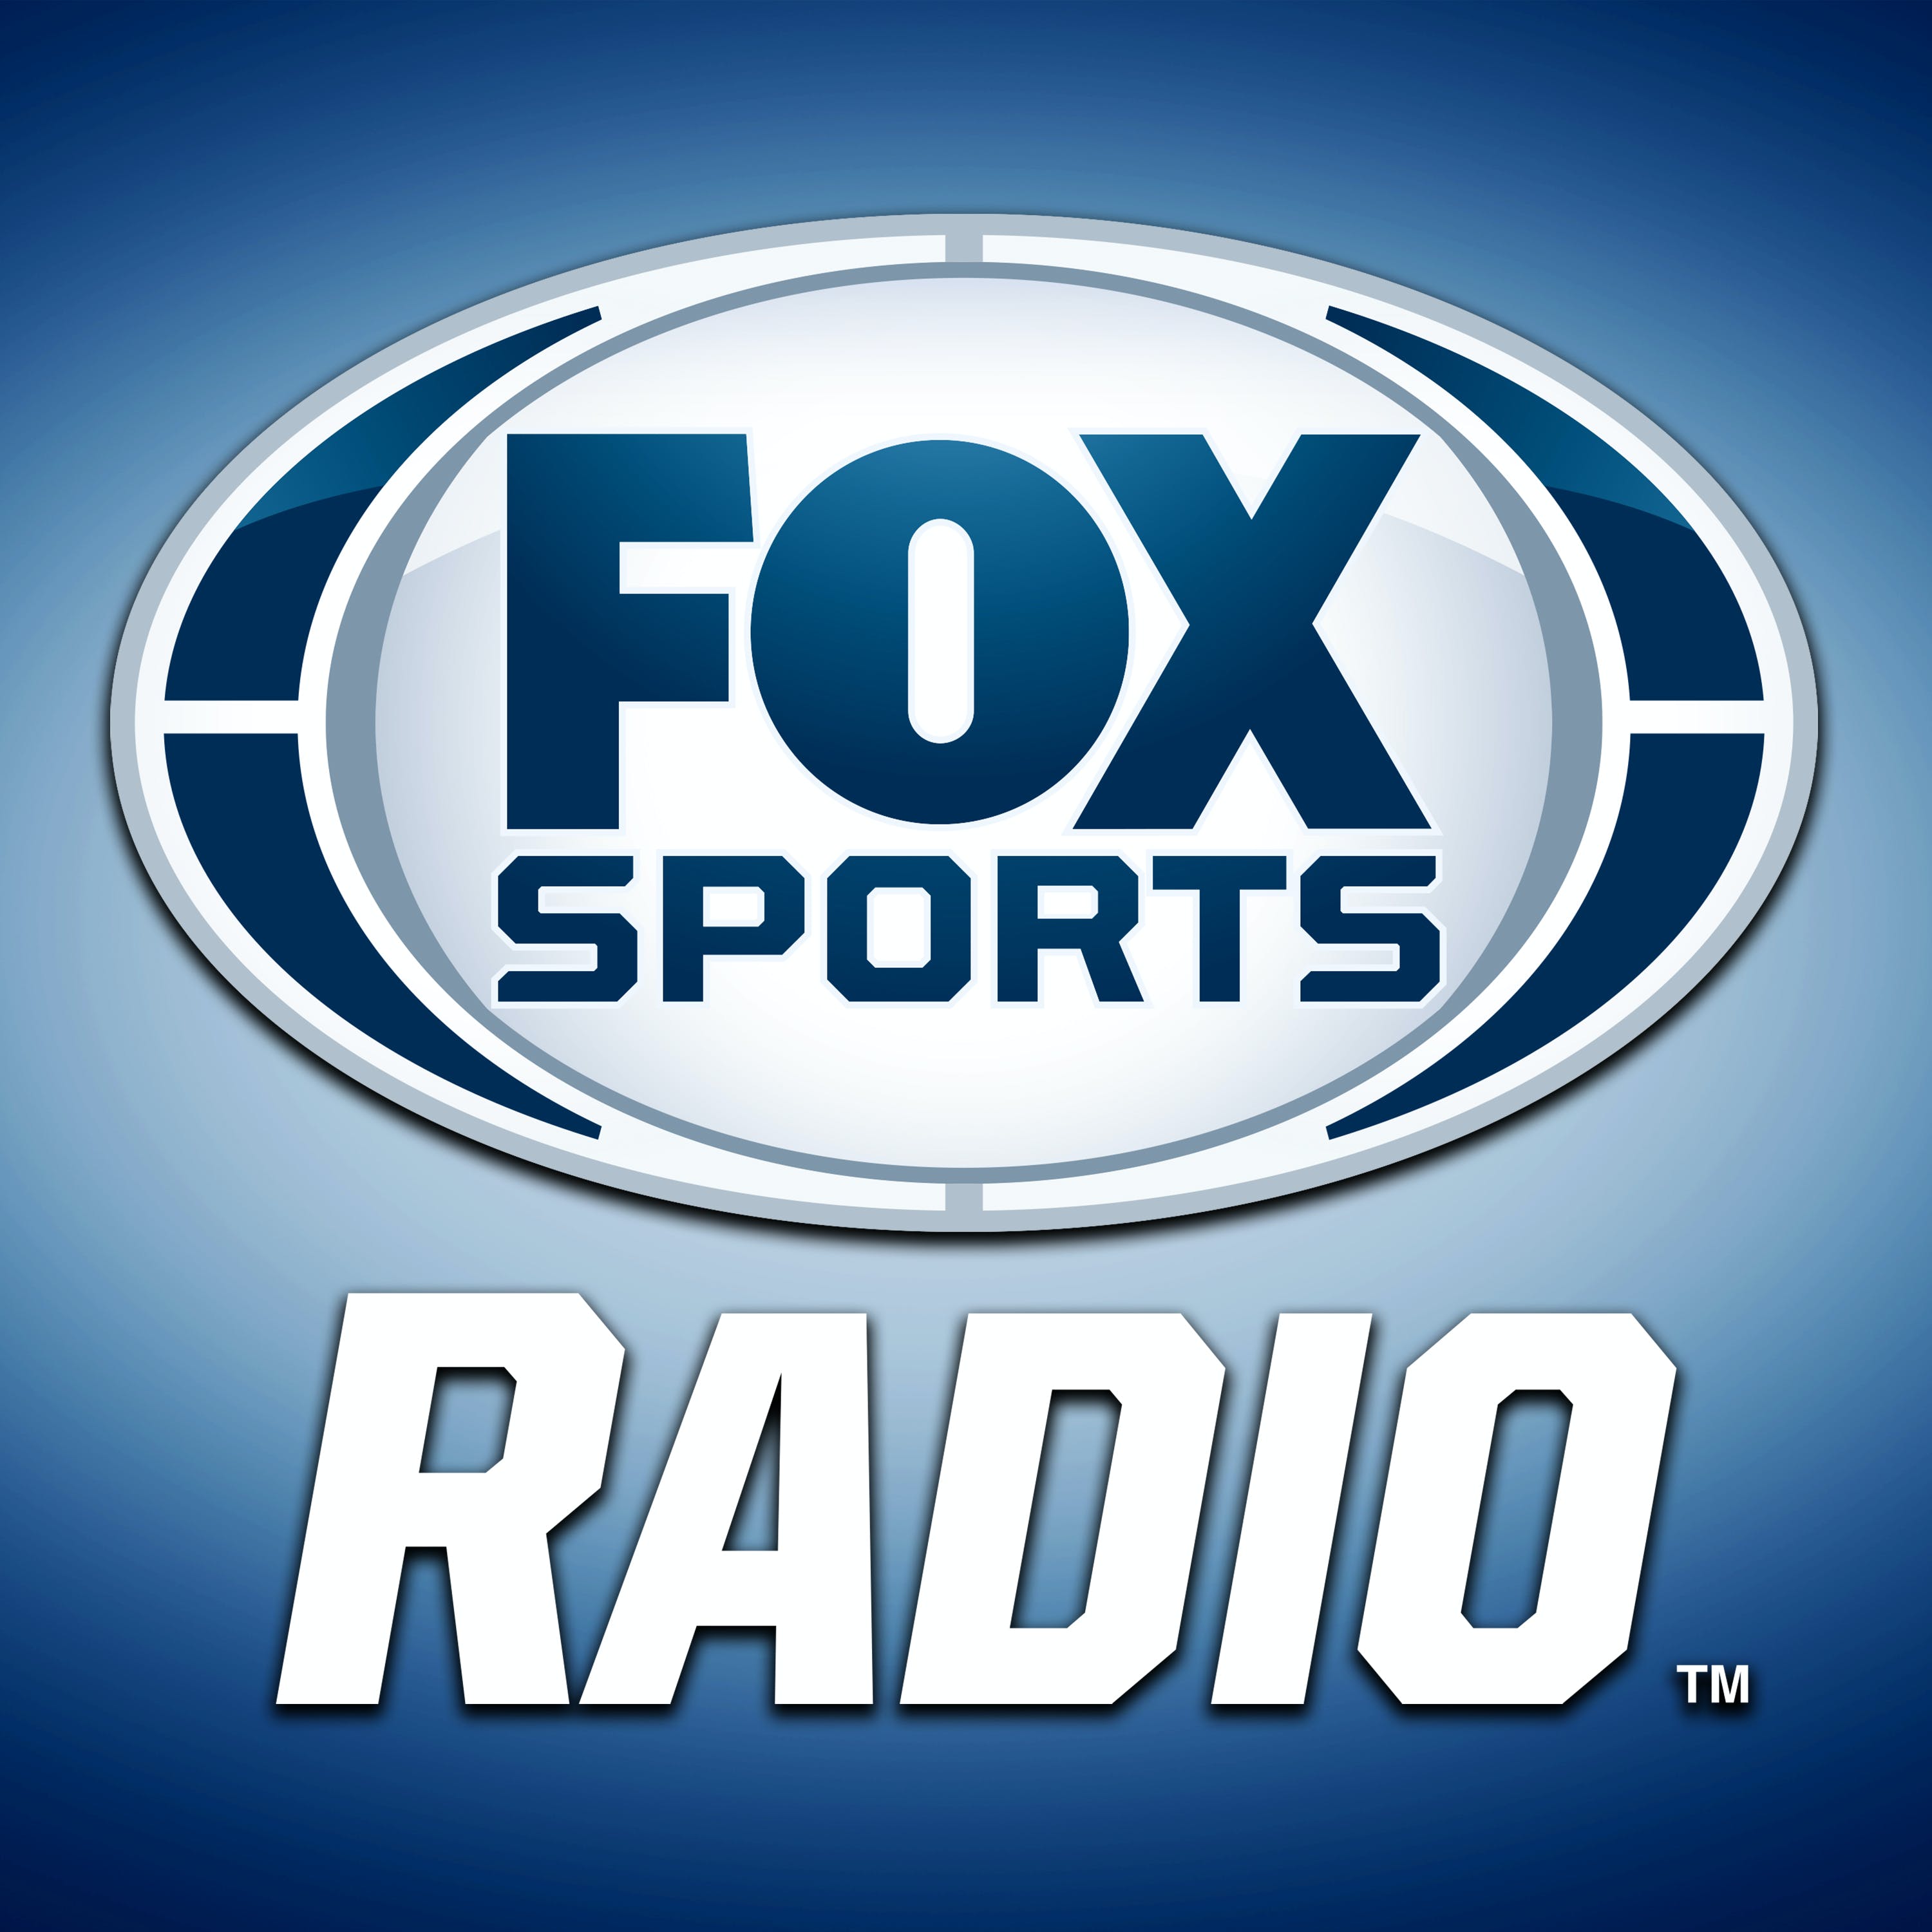 05/30/2021 - FOX Sports Sunday with Andy Furman and Brian Noe